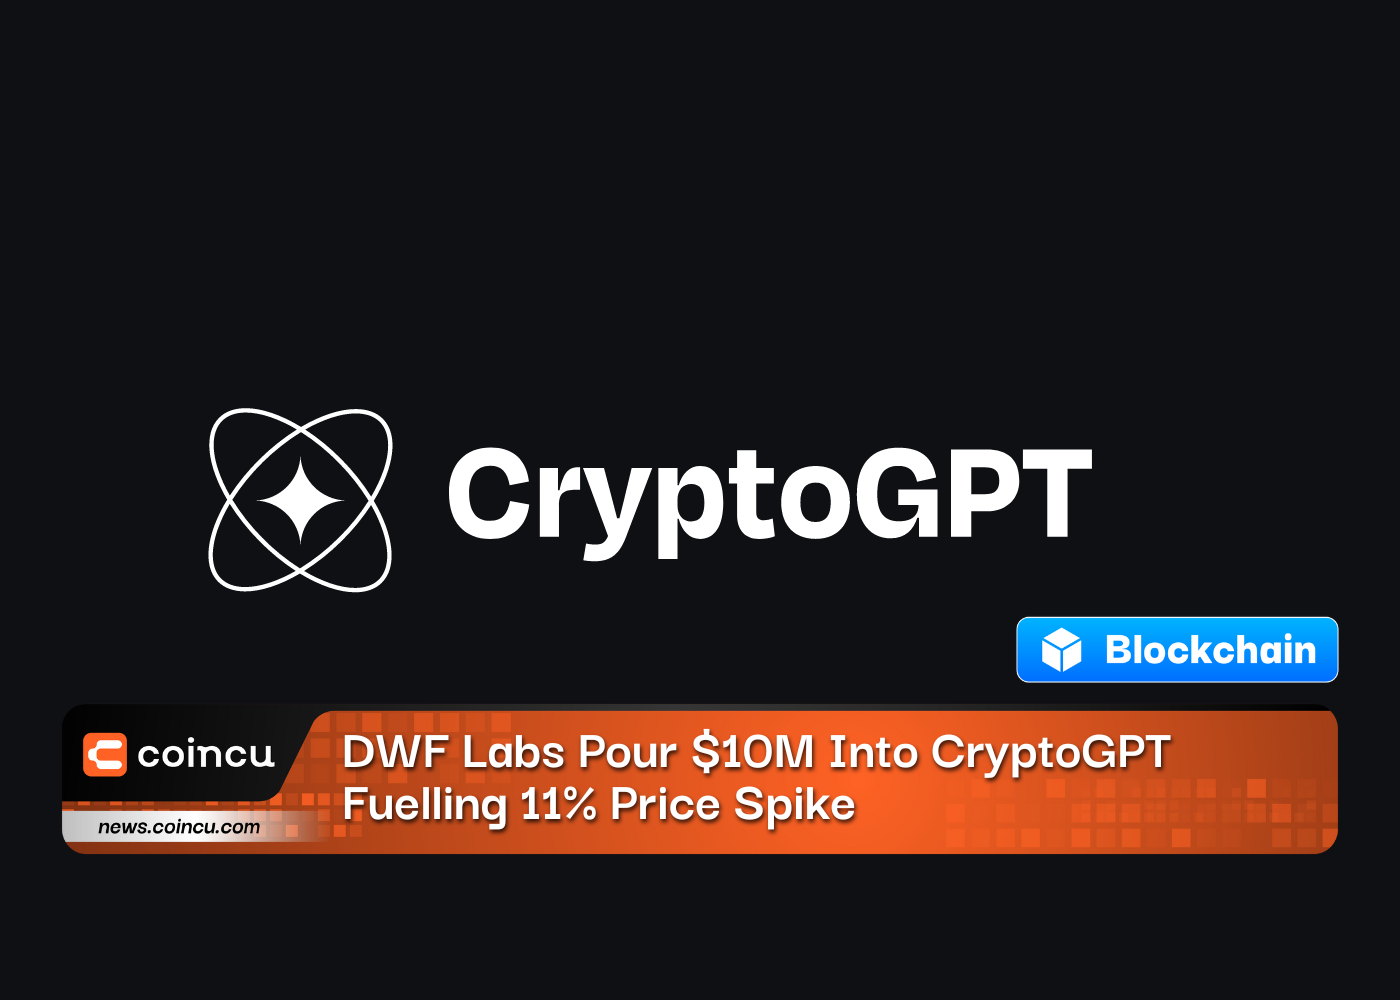 DWF Labs Pour 10M Into CryptoGPT